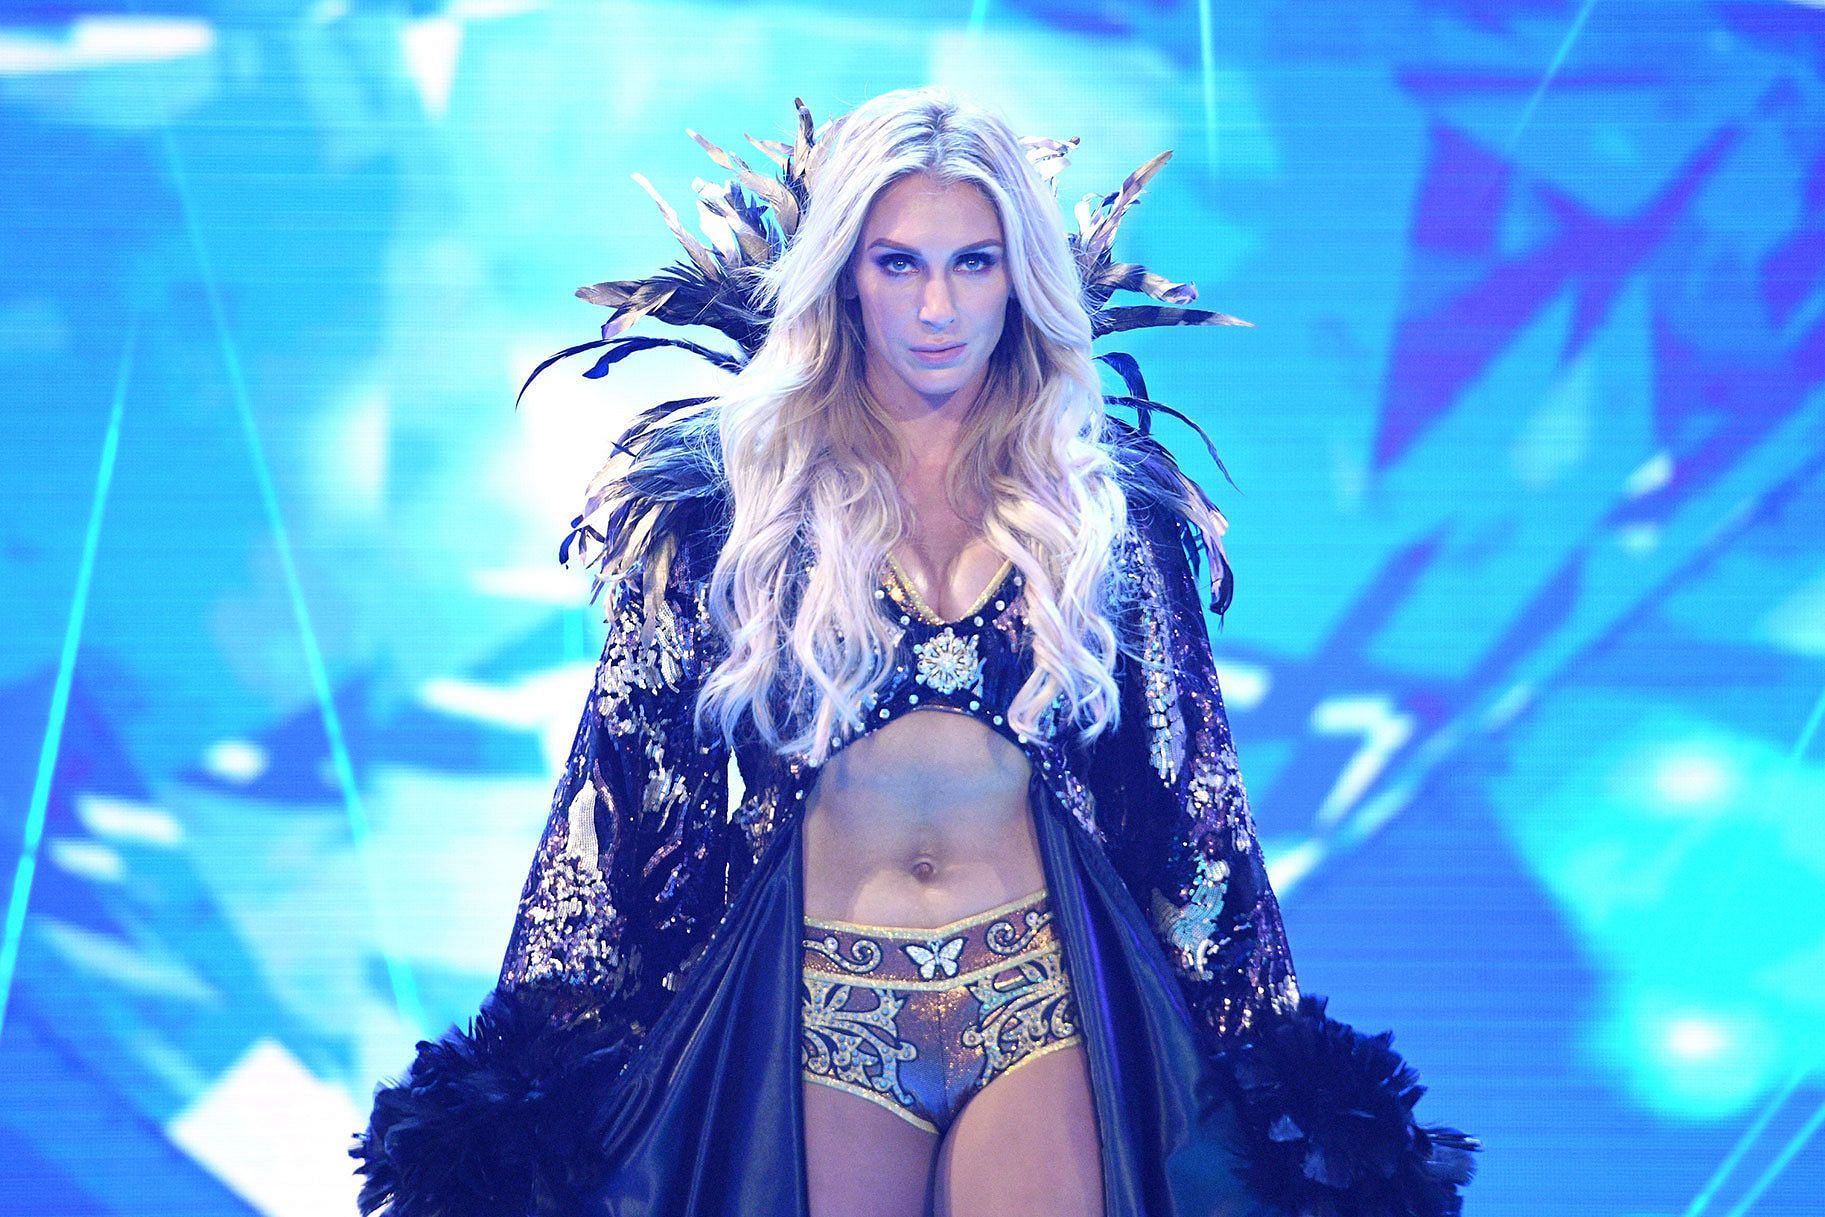 Charlotte Flair is a former WWE SmackDown Women